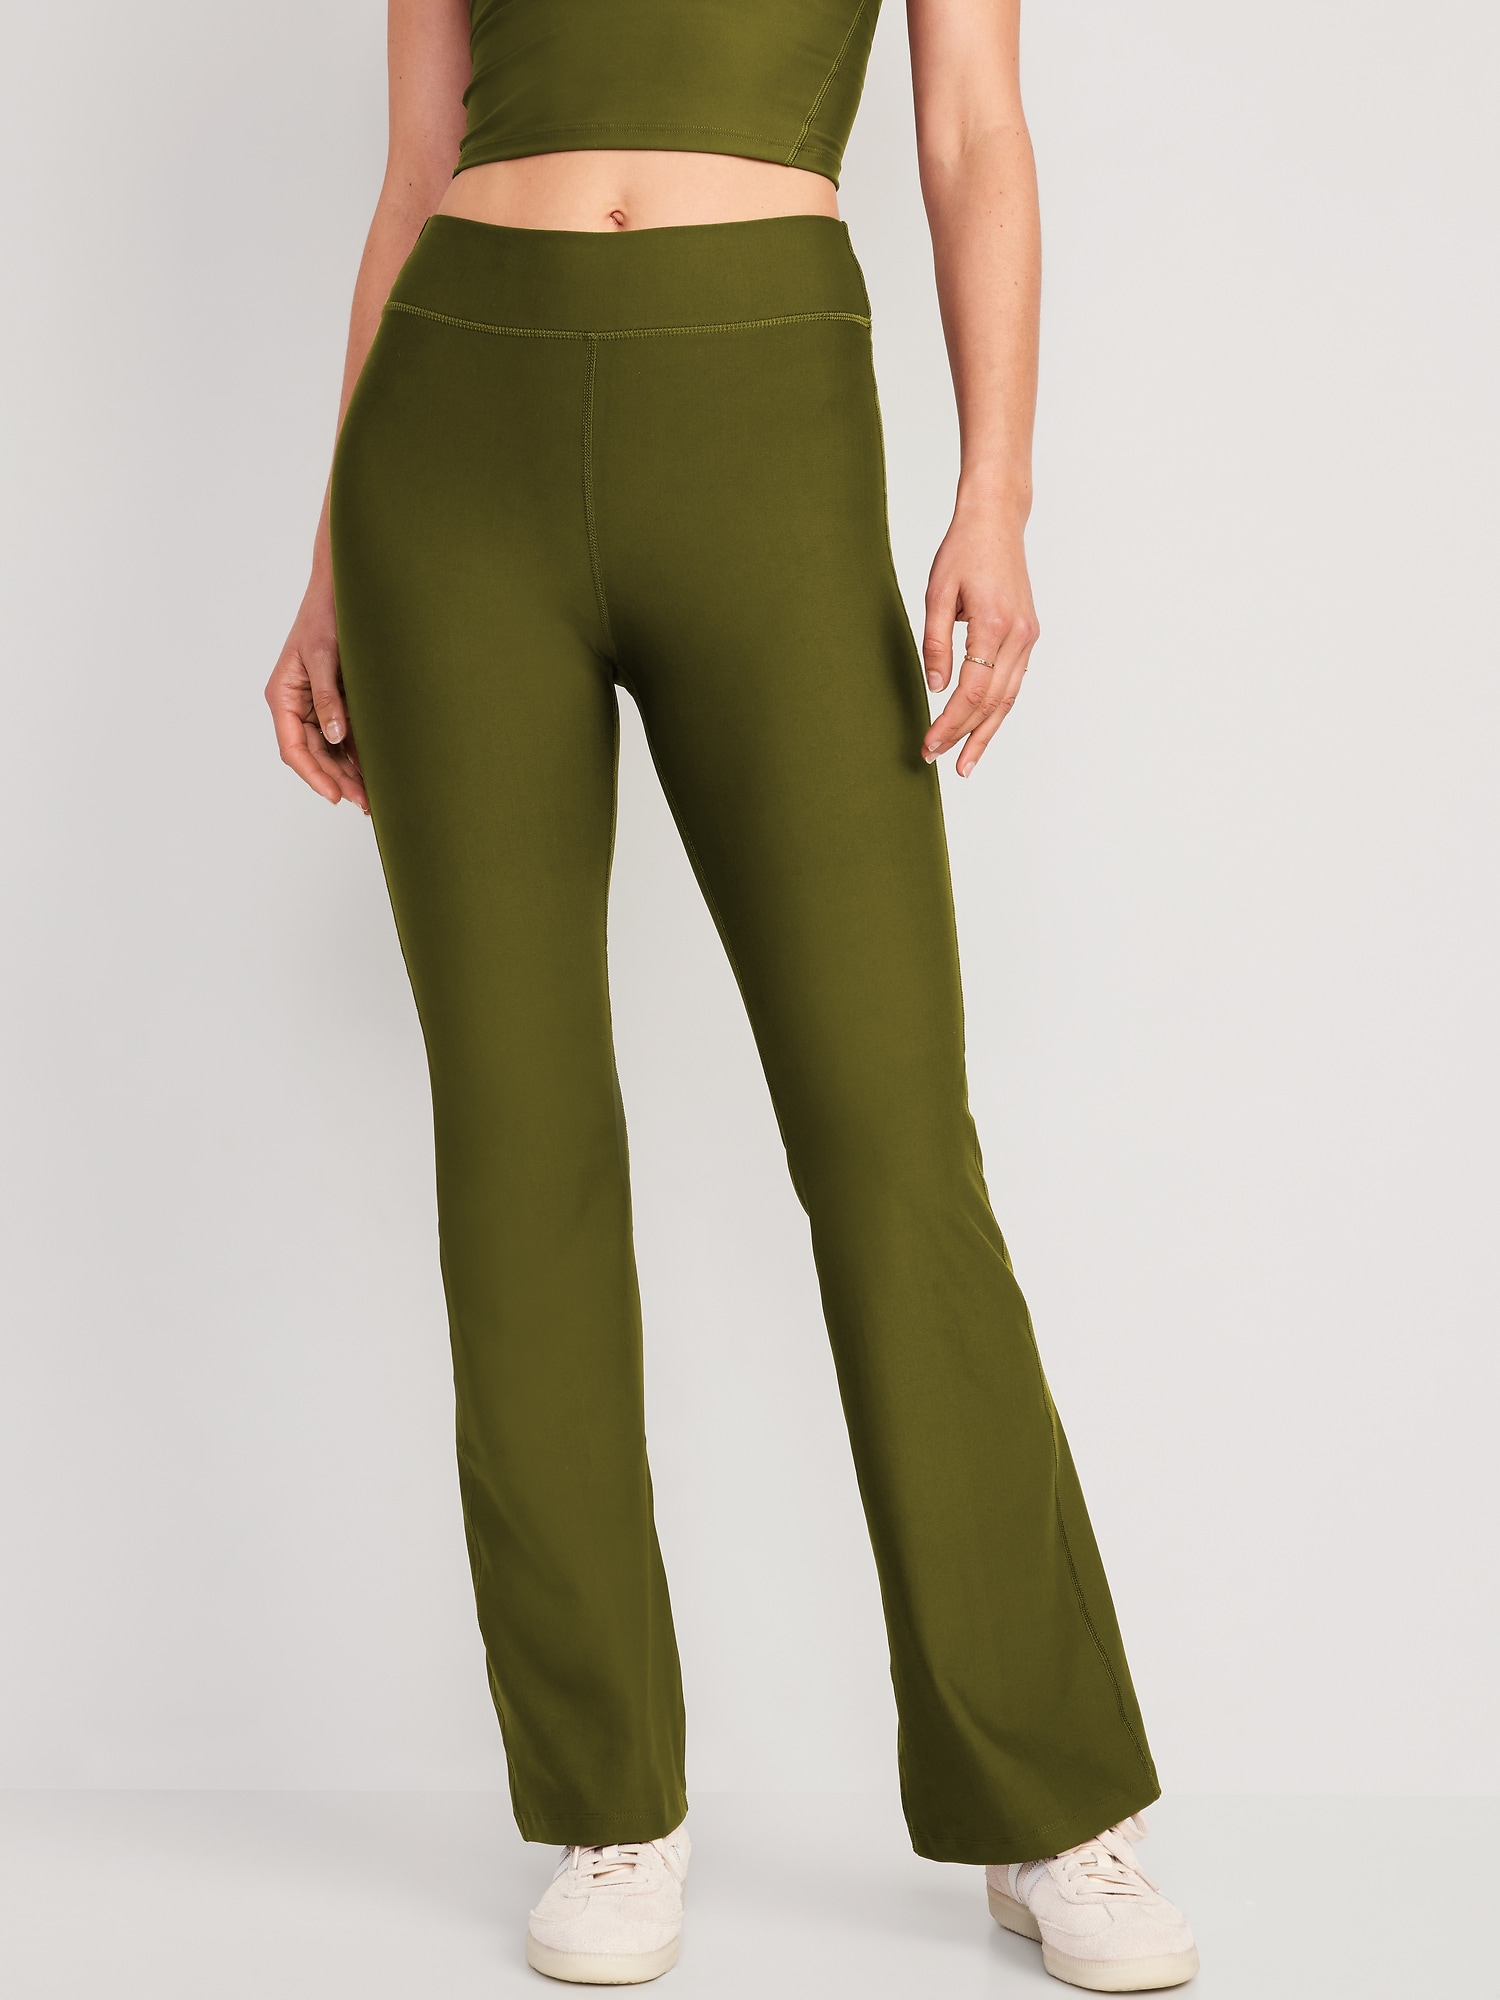 Extra High-Waisted PowerSoft Flare Leggings